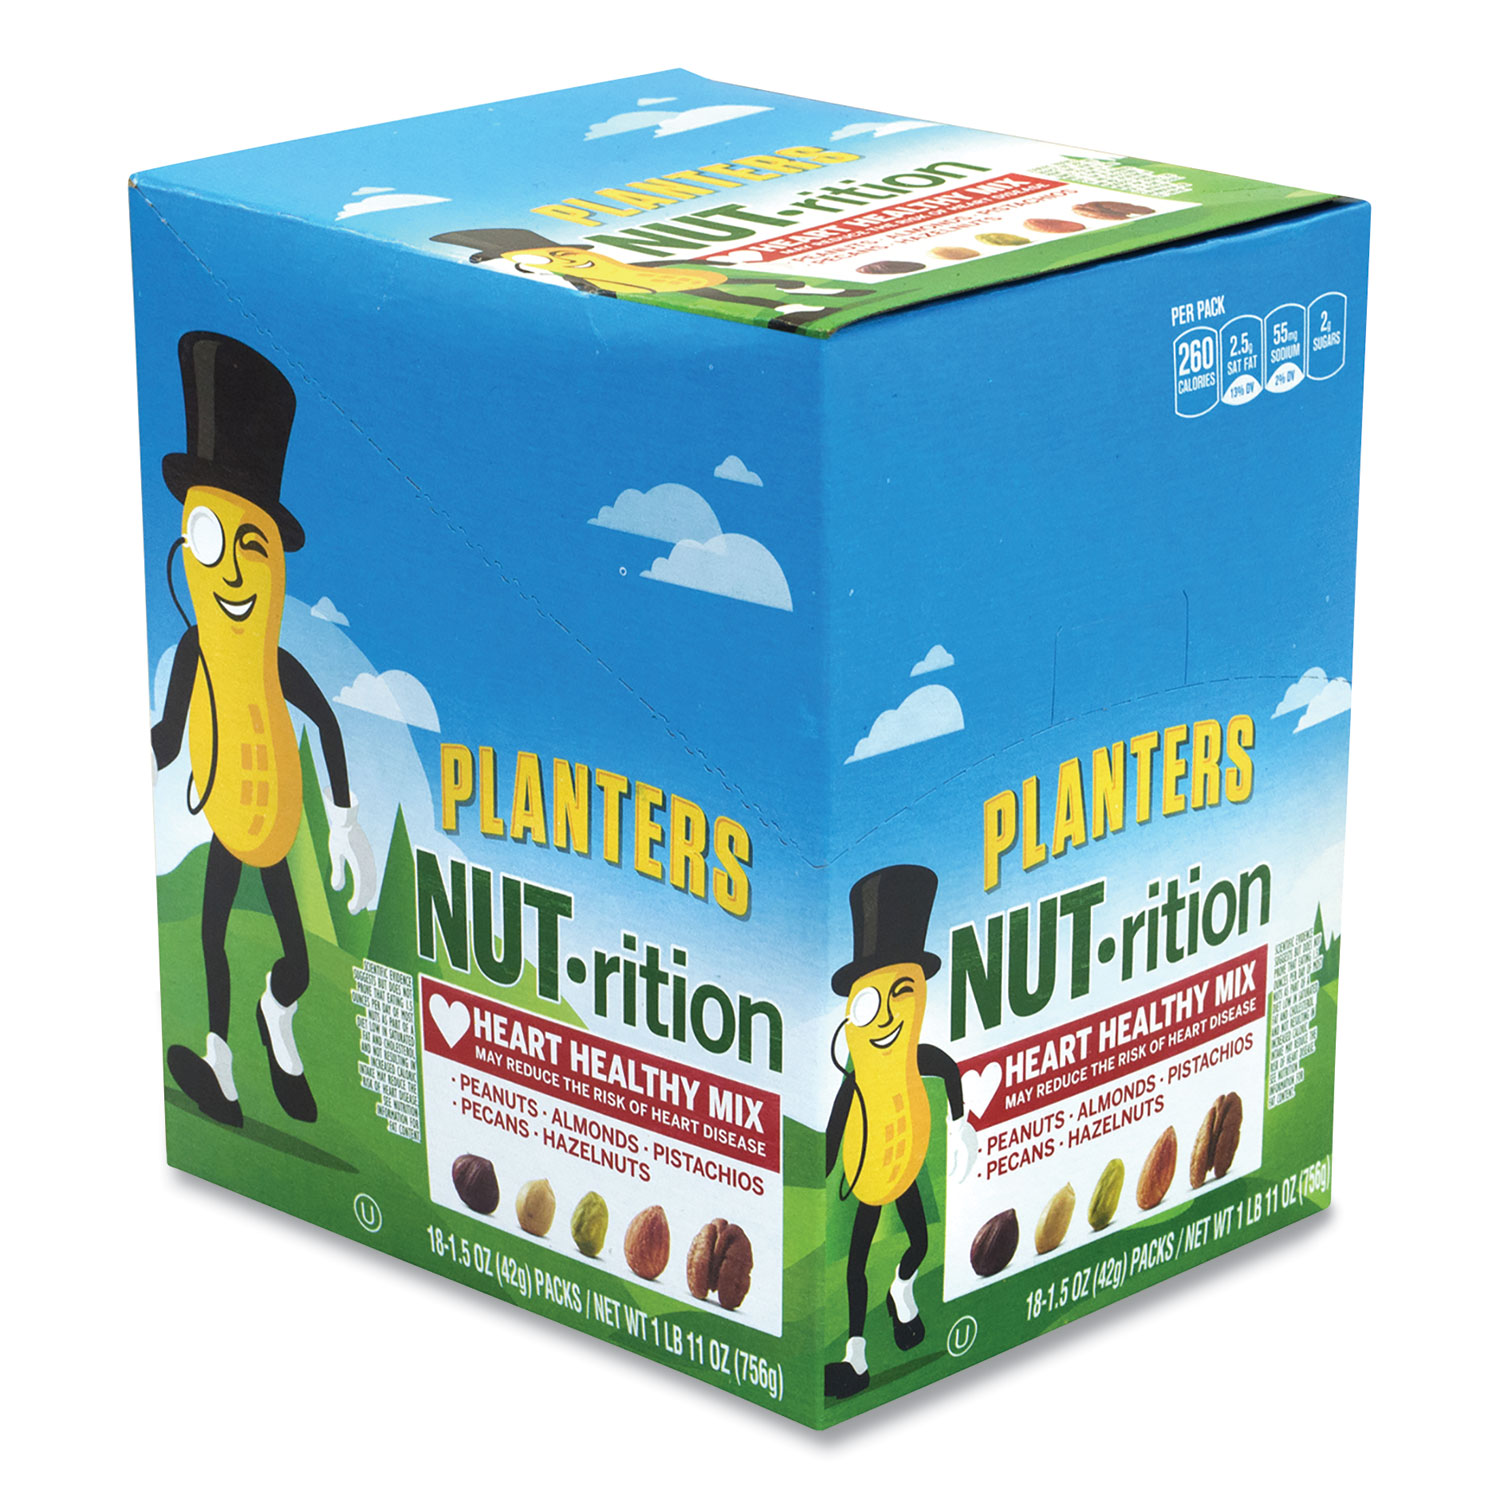 Planters® NUT-rition Heart Healthy Mix, 1.5 oz Tube, 18 Tubes/Box, Free Delivery in 1-4 Business Days